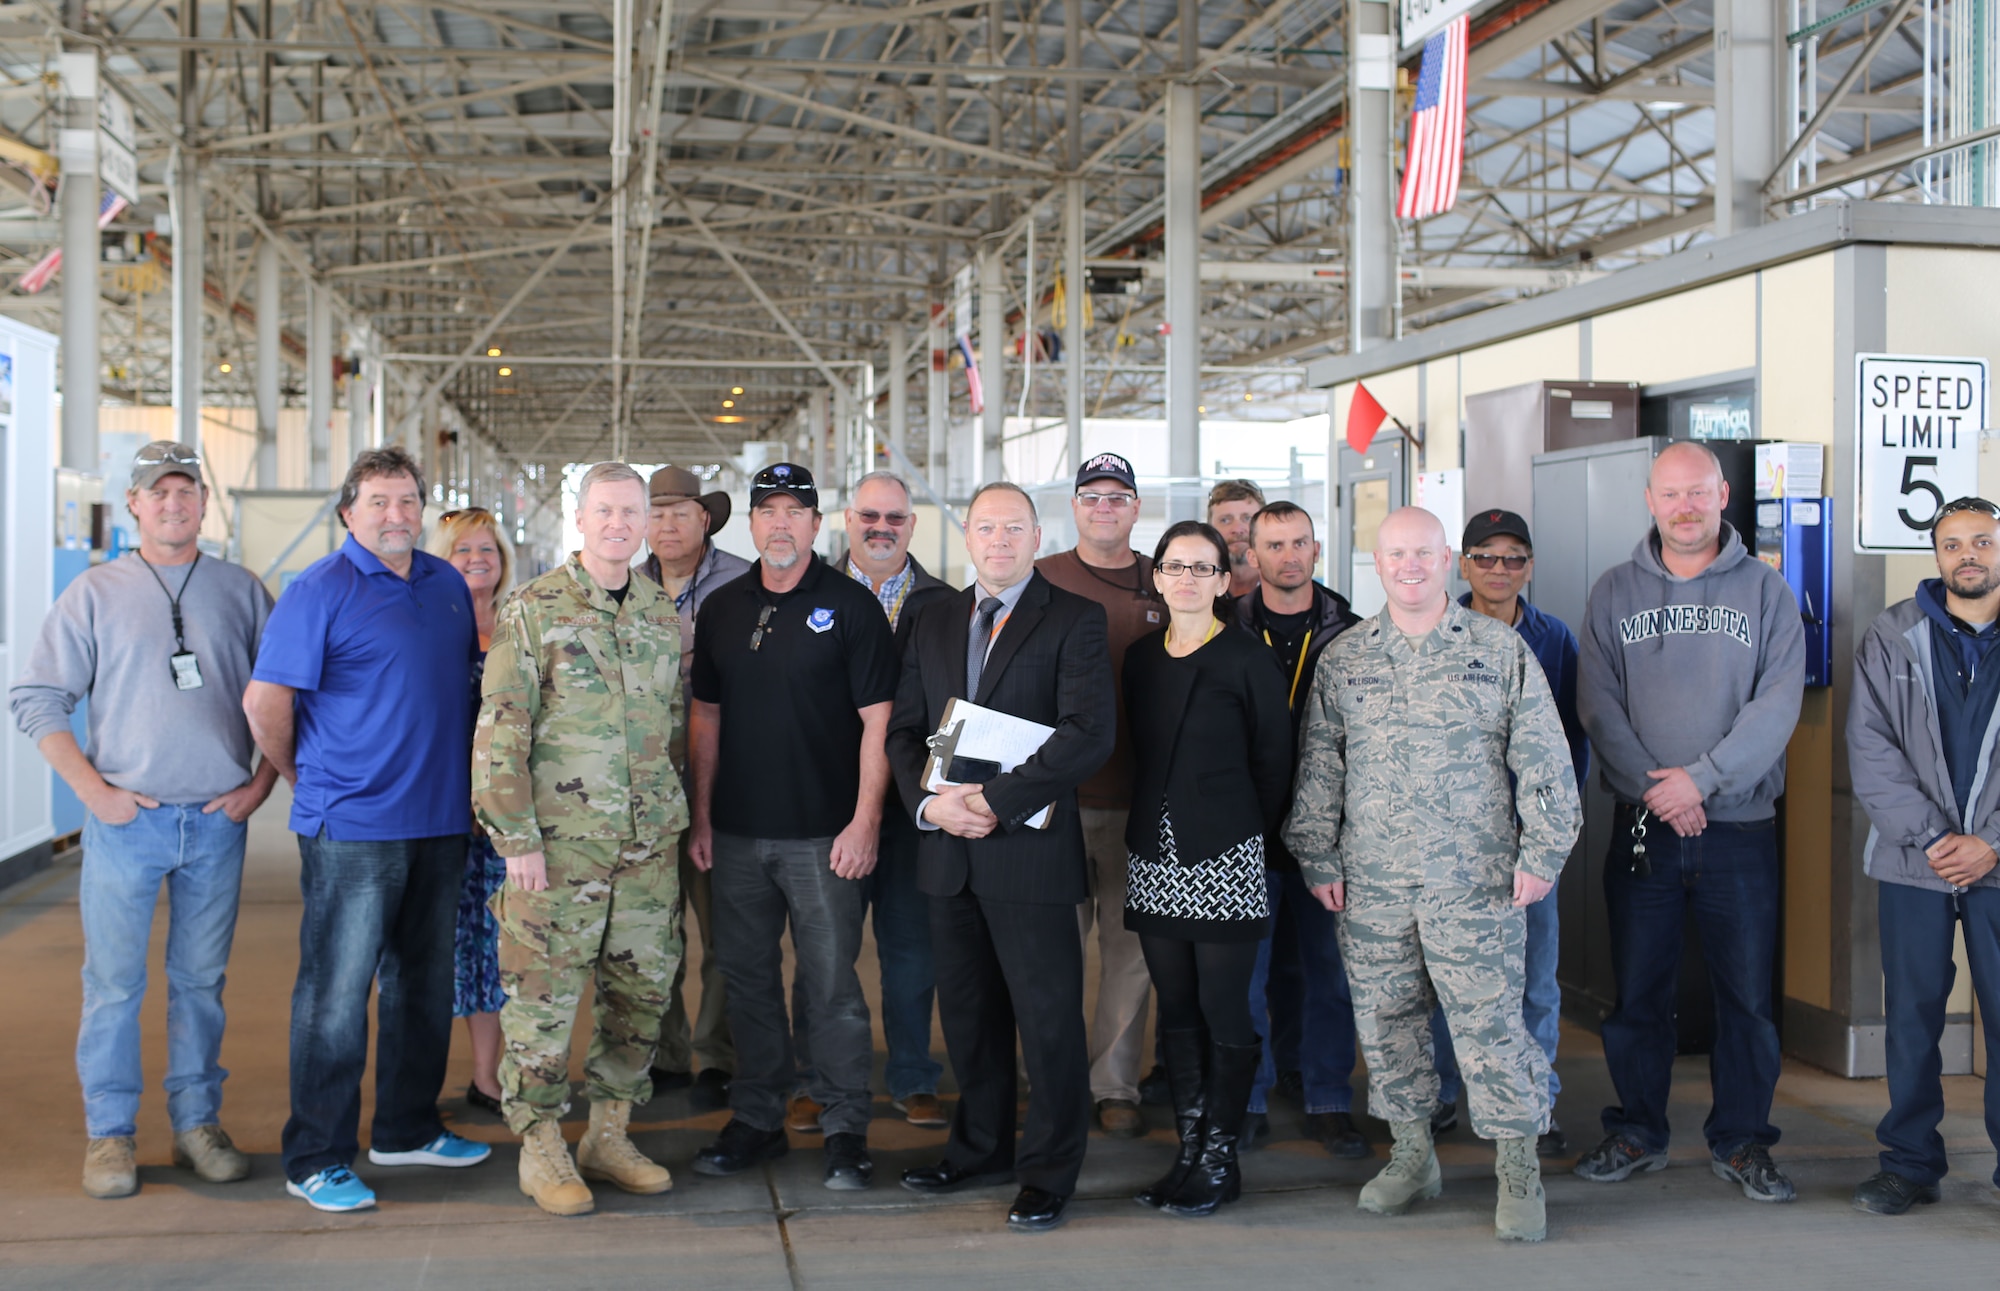 After recognizing the 309th Aerospace Maintenance and Regeneration Group for their contribution to the MC-130H and AC-130 sustainment program, Maj. Gen. Gregory Ferguson, the Air National Guard Assistant to the Commander, Air Force Special Operations Command, meets with the team credited with the C-130 outer wing refurbishment program. From left, James Courson, Robert Cappell, Caroline Sturm, Maj. Gen. Ferguson, Loren Higgins, Dave Lang, Tony Draper, Timothy Gray, Mark Perrodin, Shirley Mercier, Chris Watkins, Scott McClure, Lt. Col. Daniel Willison, Binh Tran, Richard Barrett and Mathew Tucker. (U.S. Air Force photo)